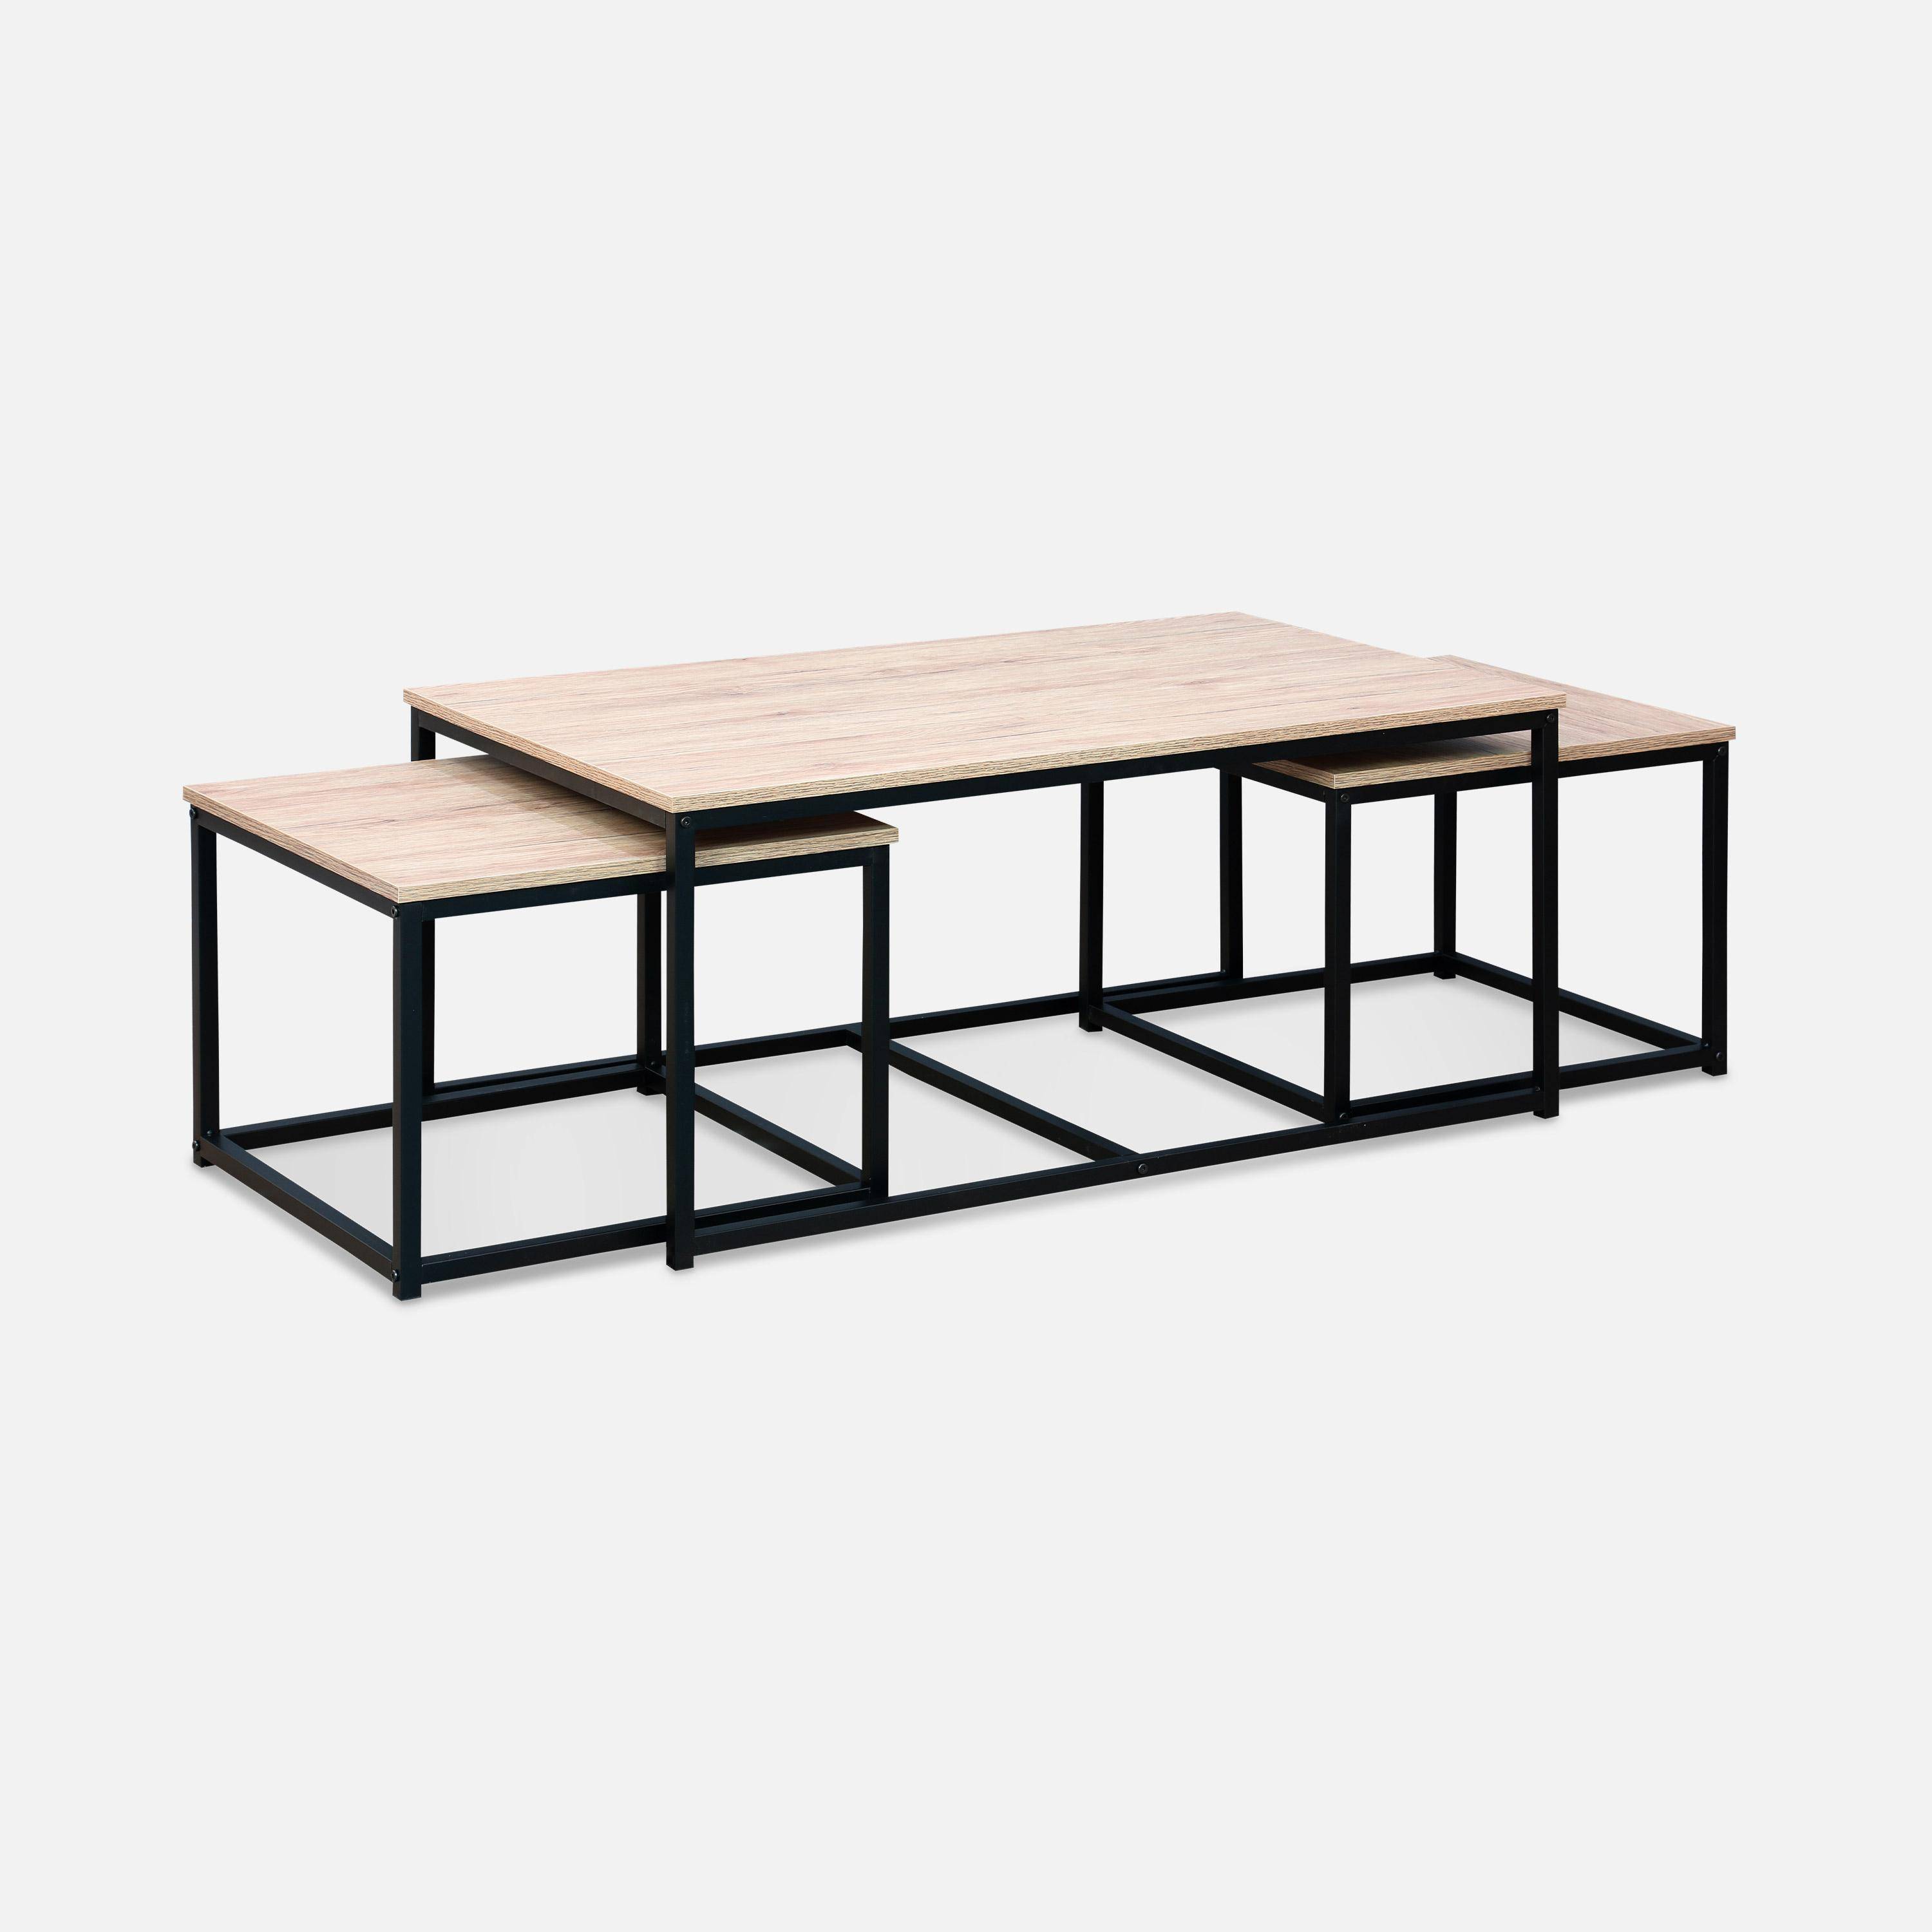 Set of 3 metal and wood-effect nesting tables, large table 100x60x45cm, 2x small tables 50x50x38cm - Loft - Black,sweeek,Photo3